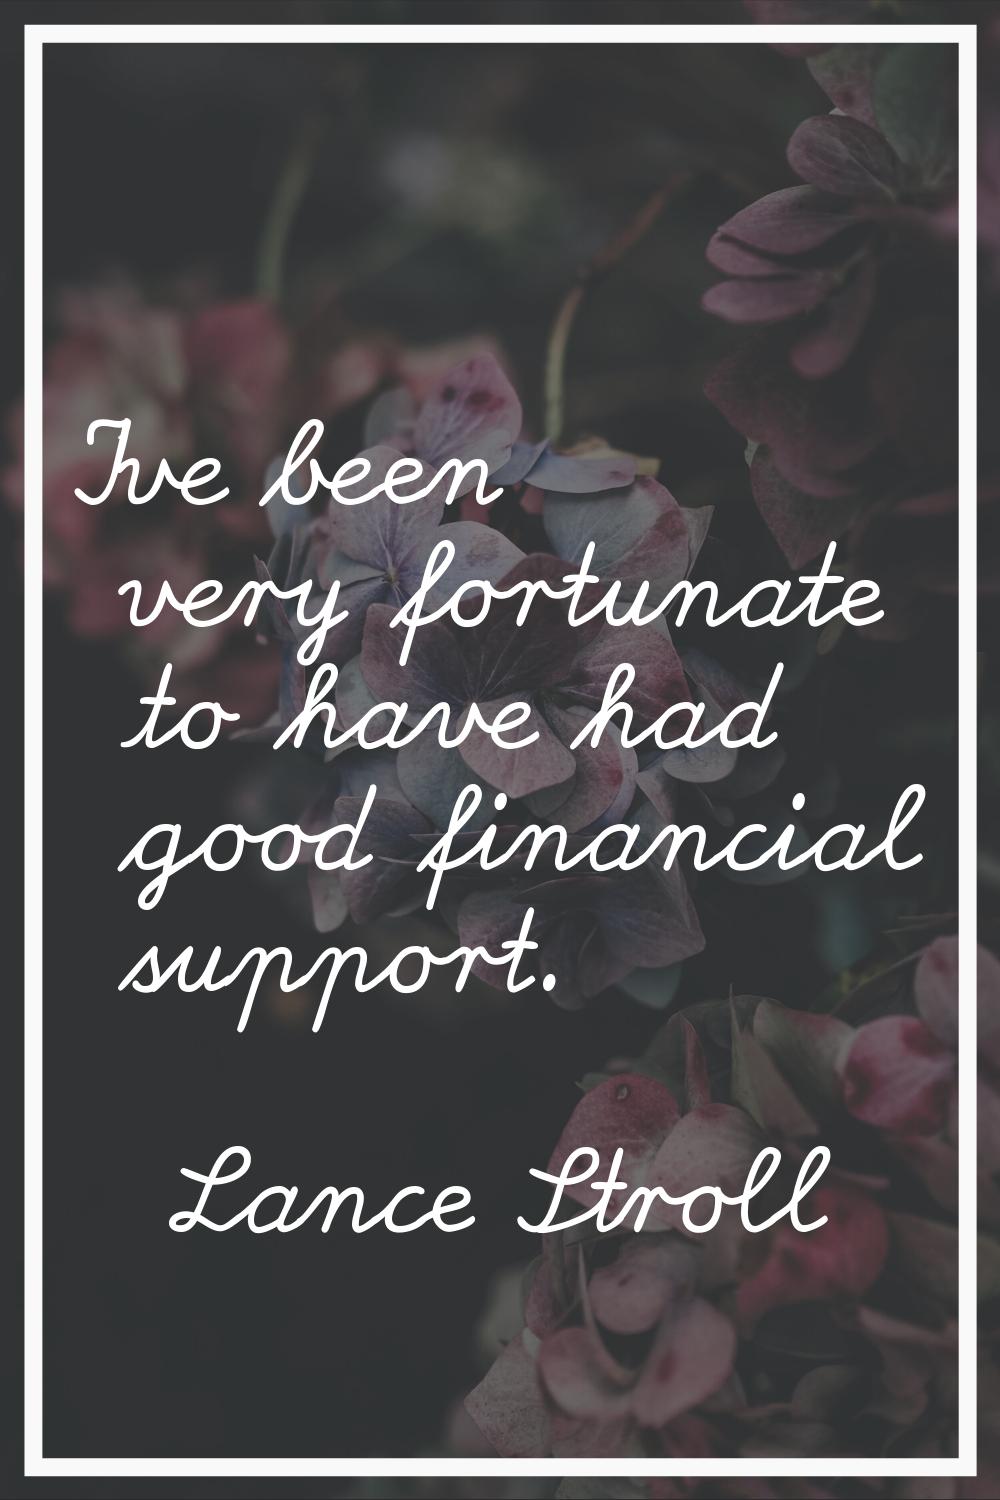 I've been very fortunate to have had good financial support.